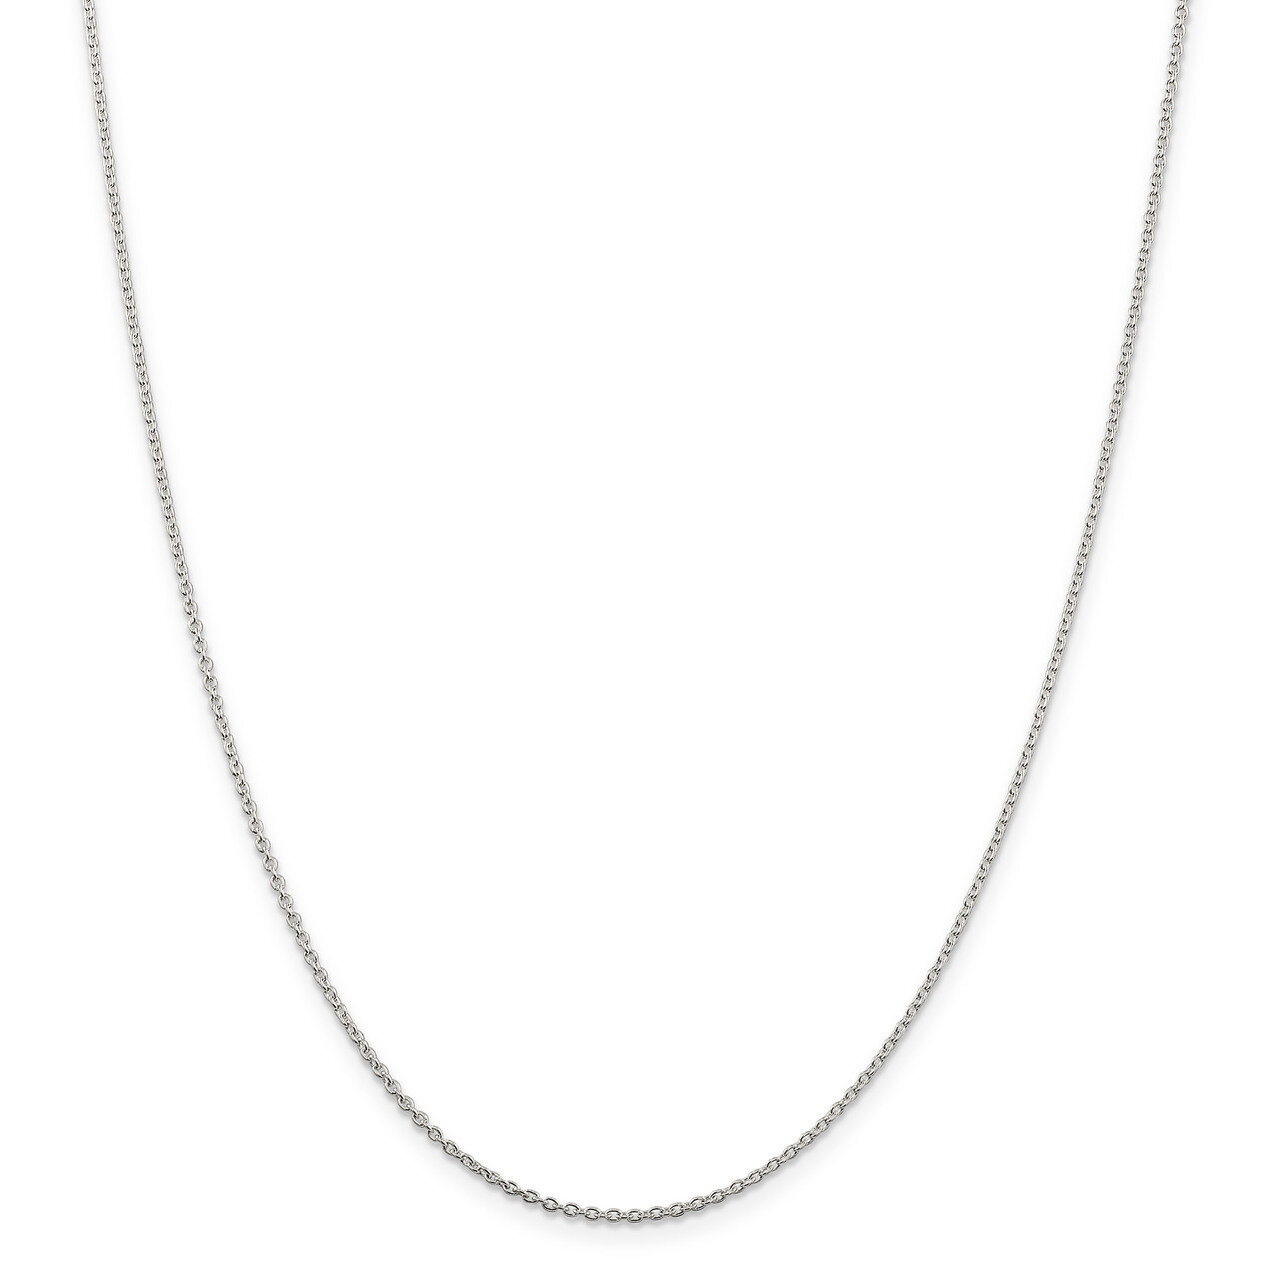 20 Inch 1.5mm Cable Chain Sterling Silver QCL040-20